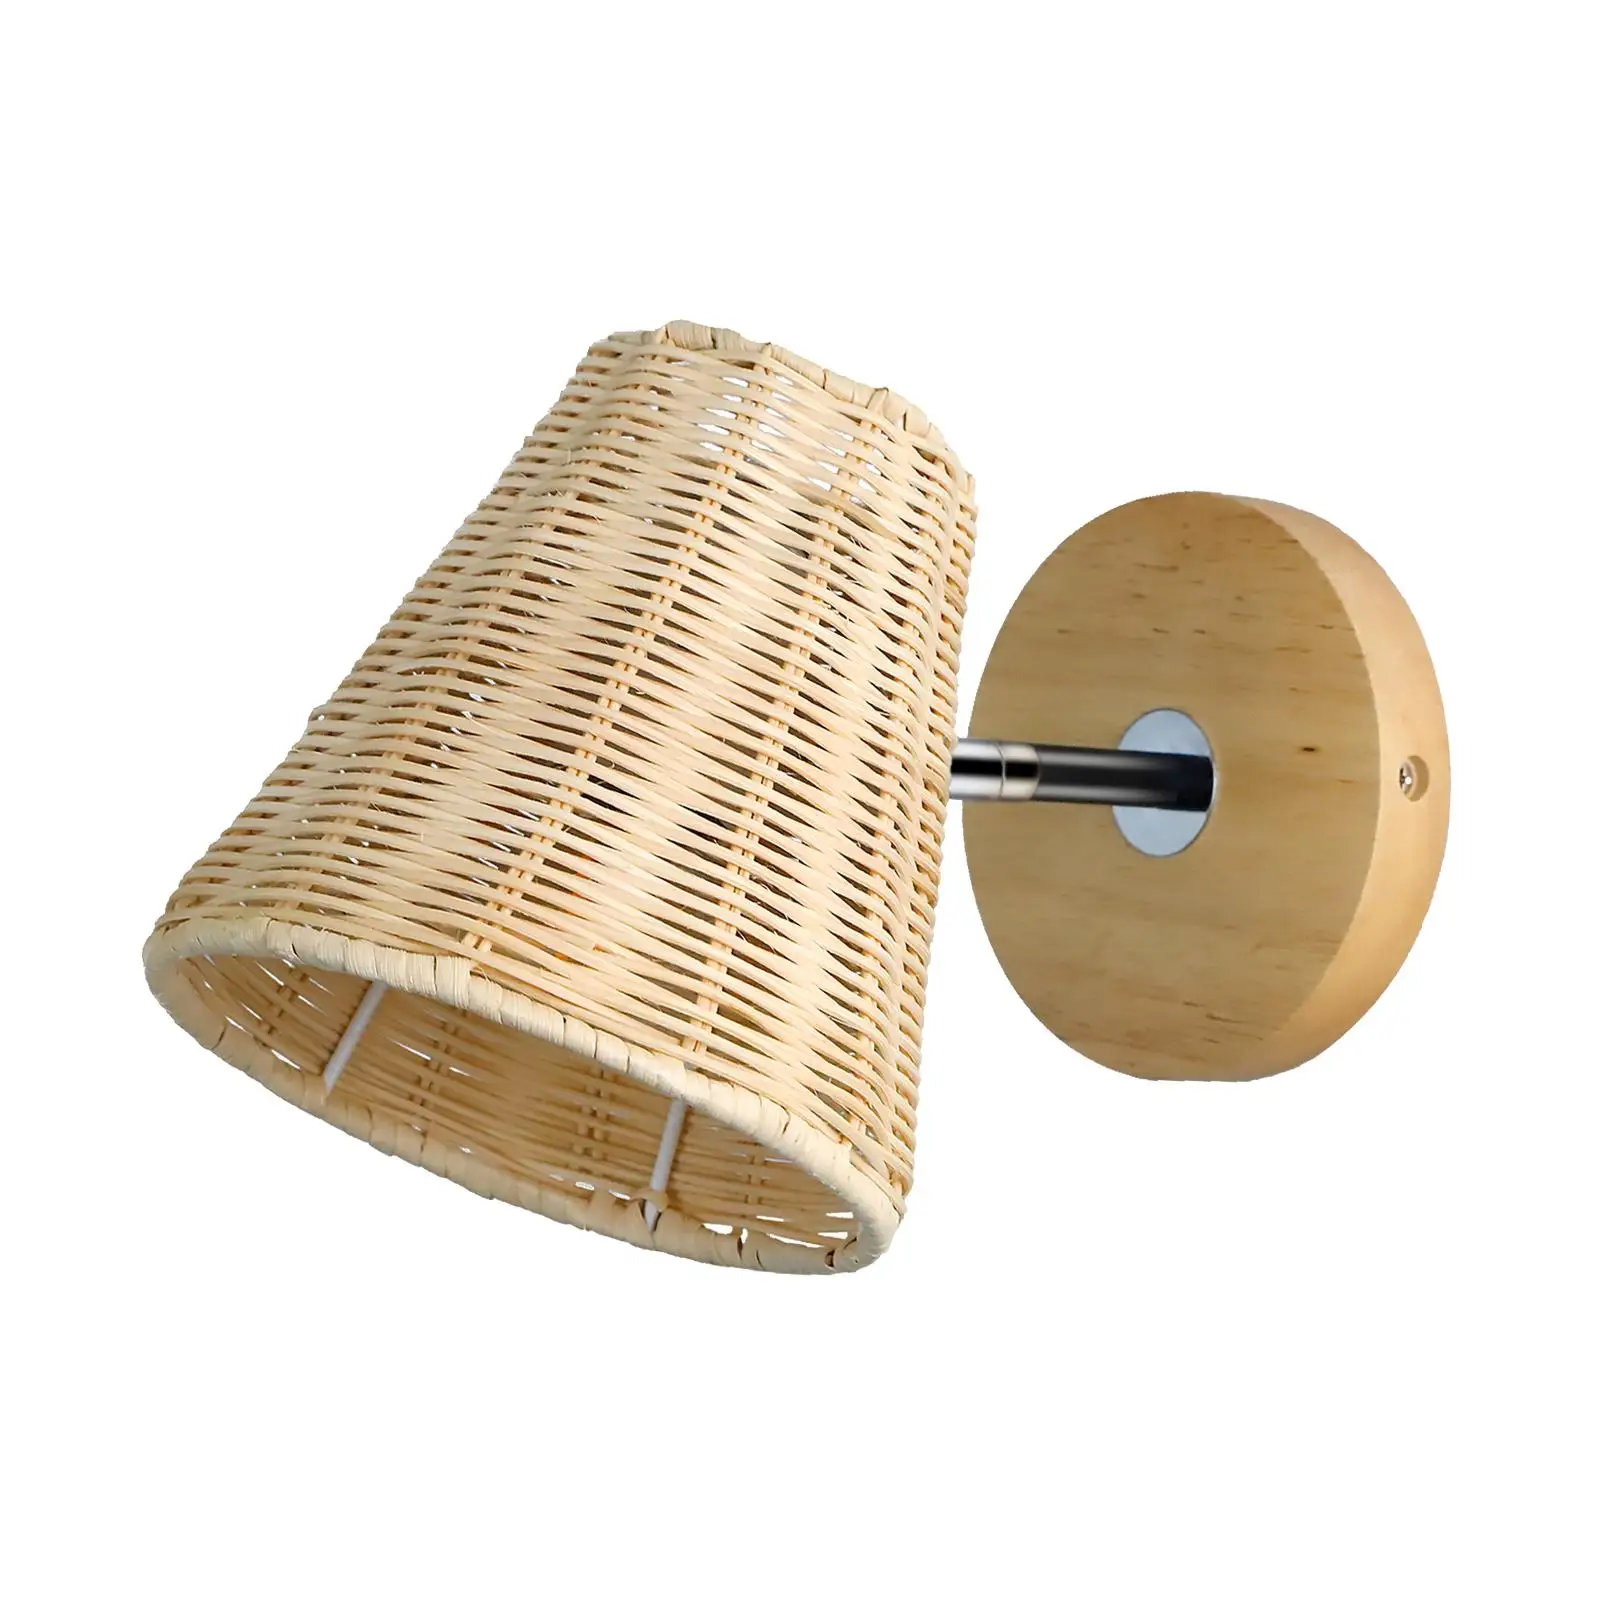 Rattan Wall Sconce Decorative Indoor Lighting Angle Adjustable Wall Mounted Bedside Lamp for Porch Restaurant Corridor Loft